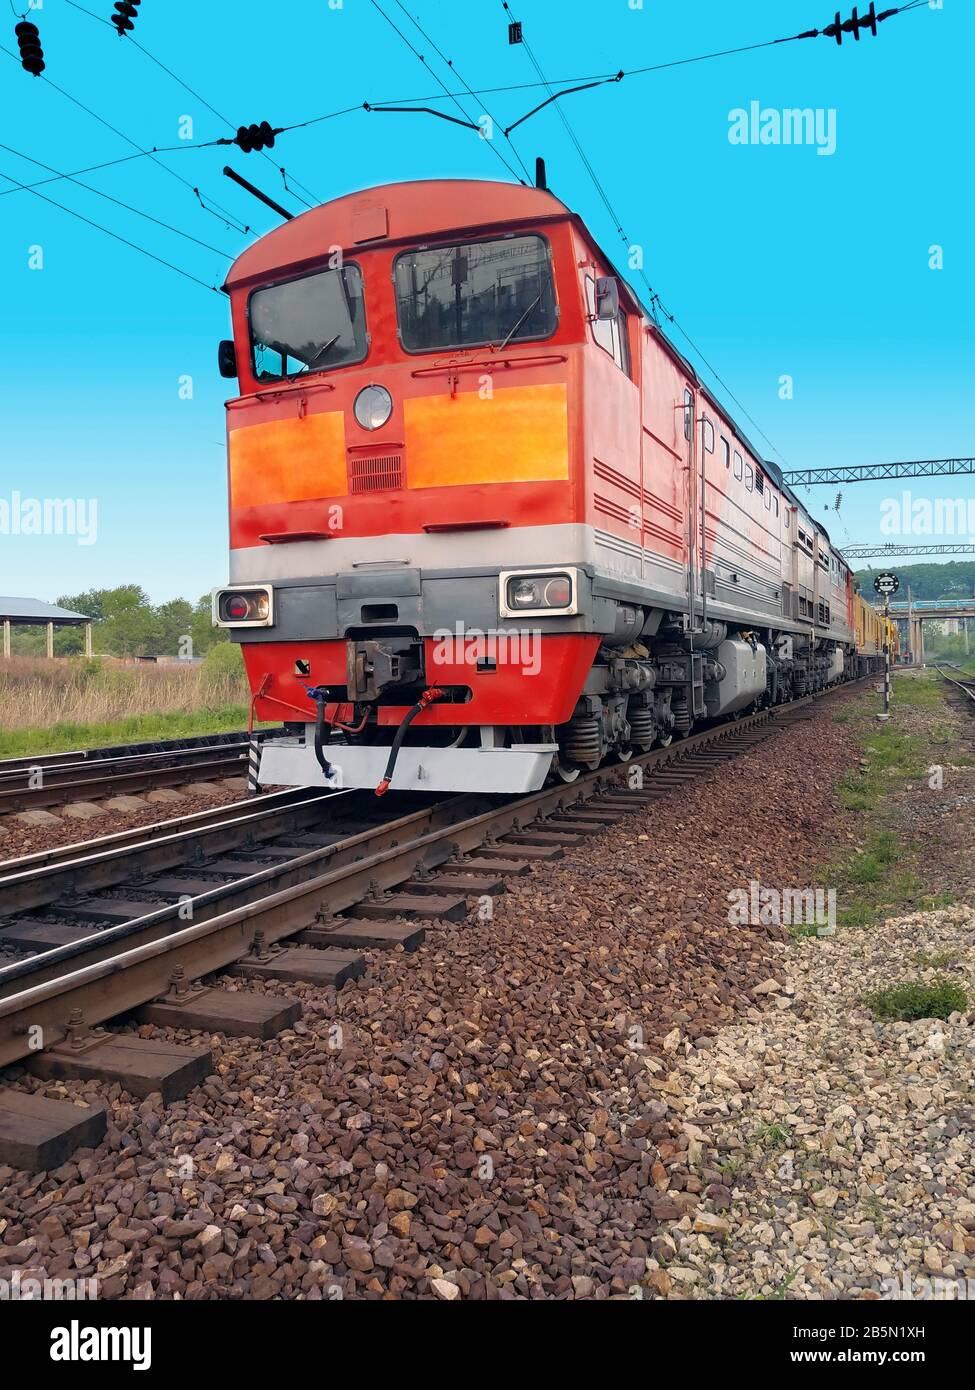 red diesel locomotive on the tracks in motion against a blue sky Stock Photo